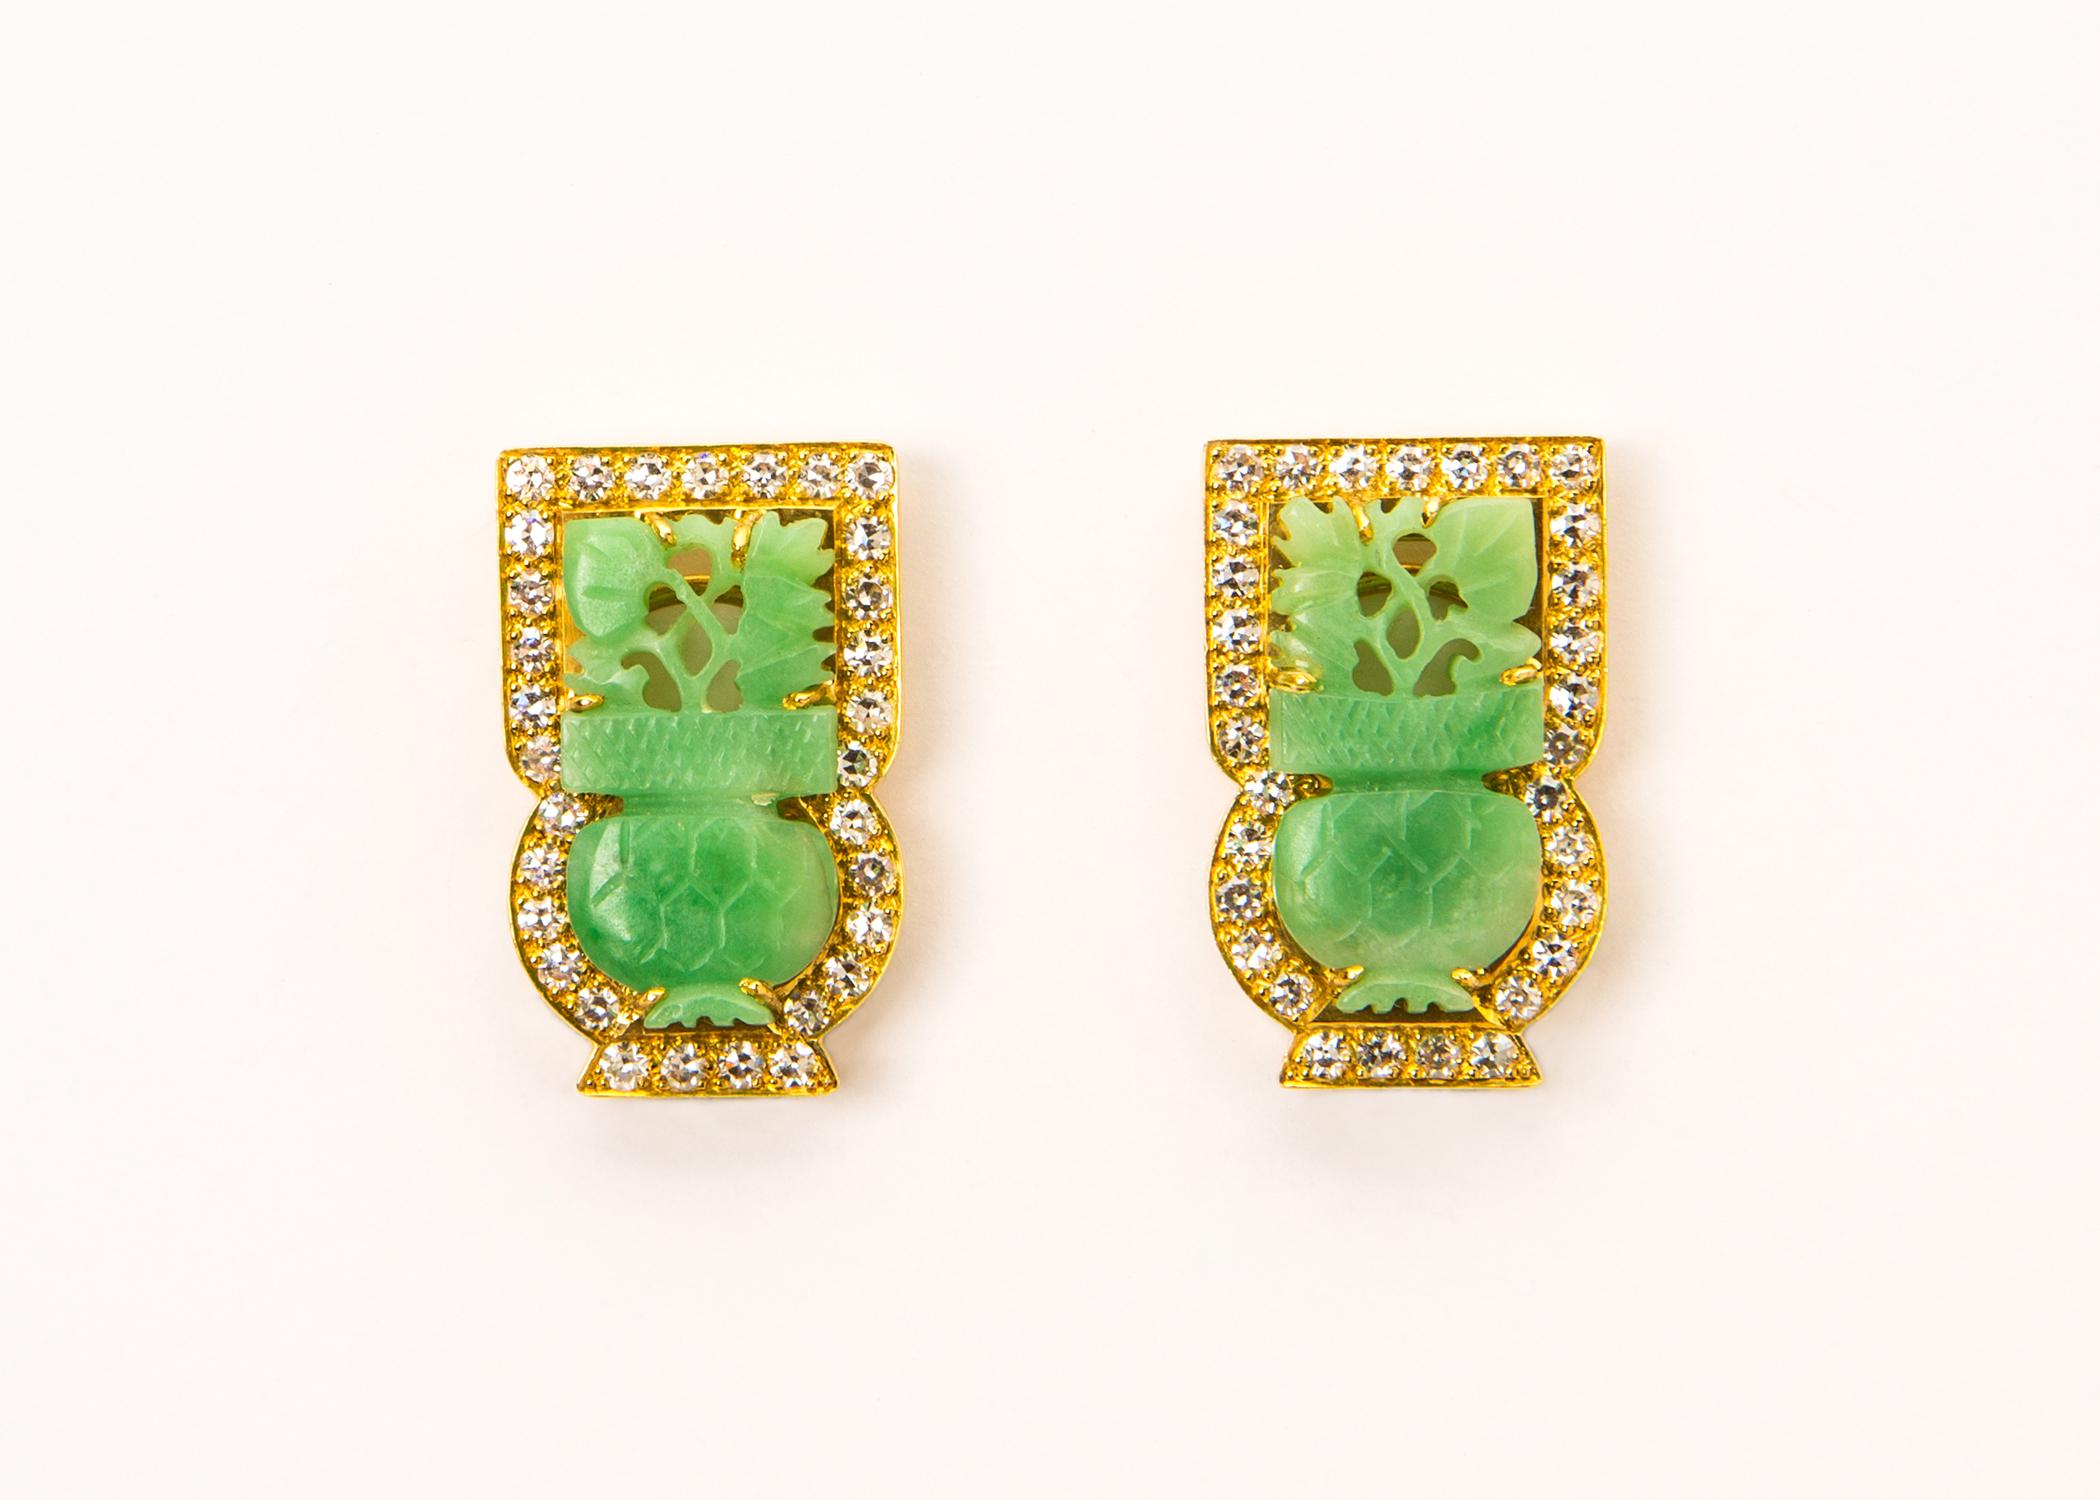 Contemporary Elegant Carved Jade Diamond Gold Earrings For Sale